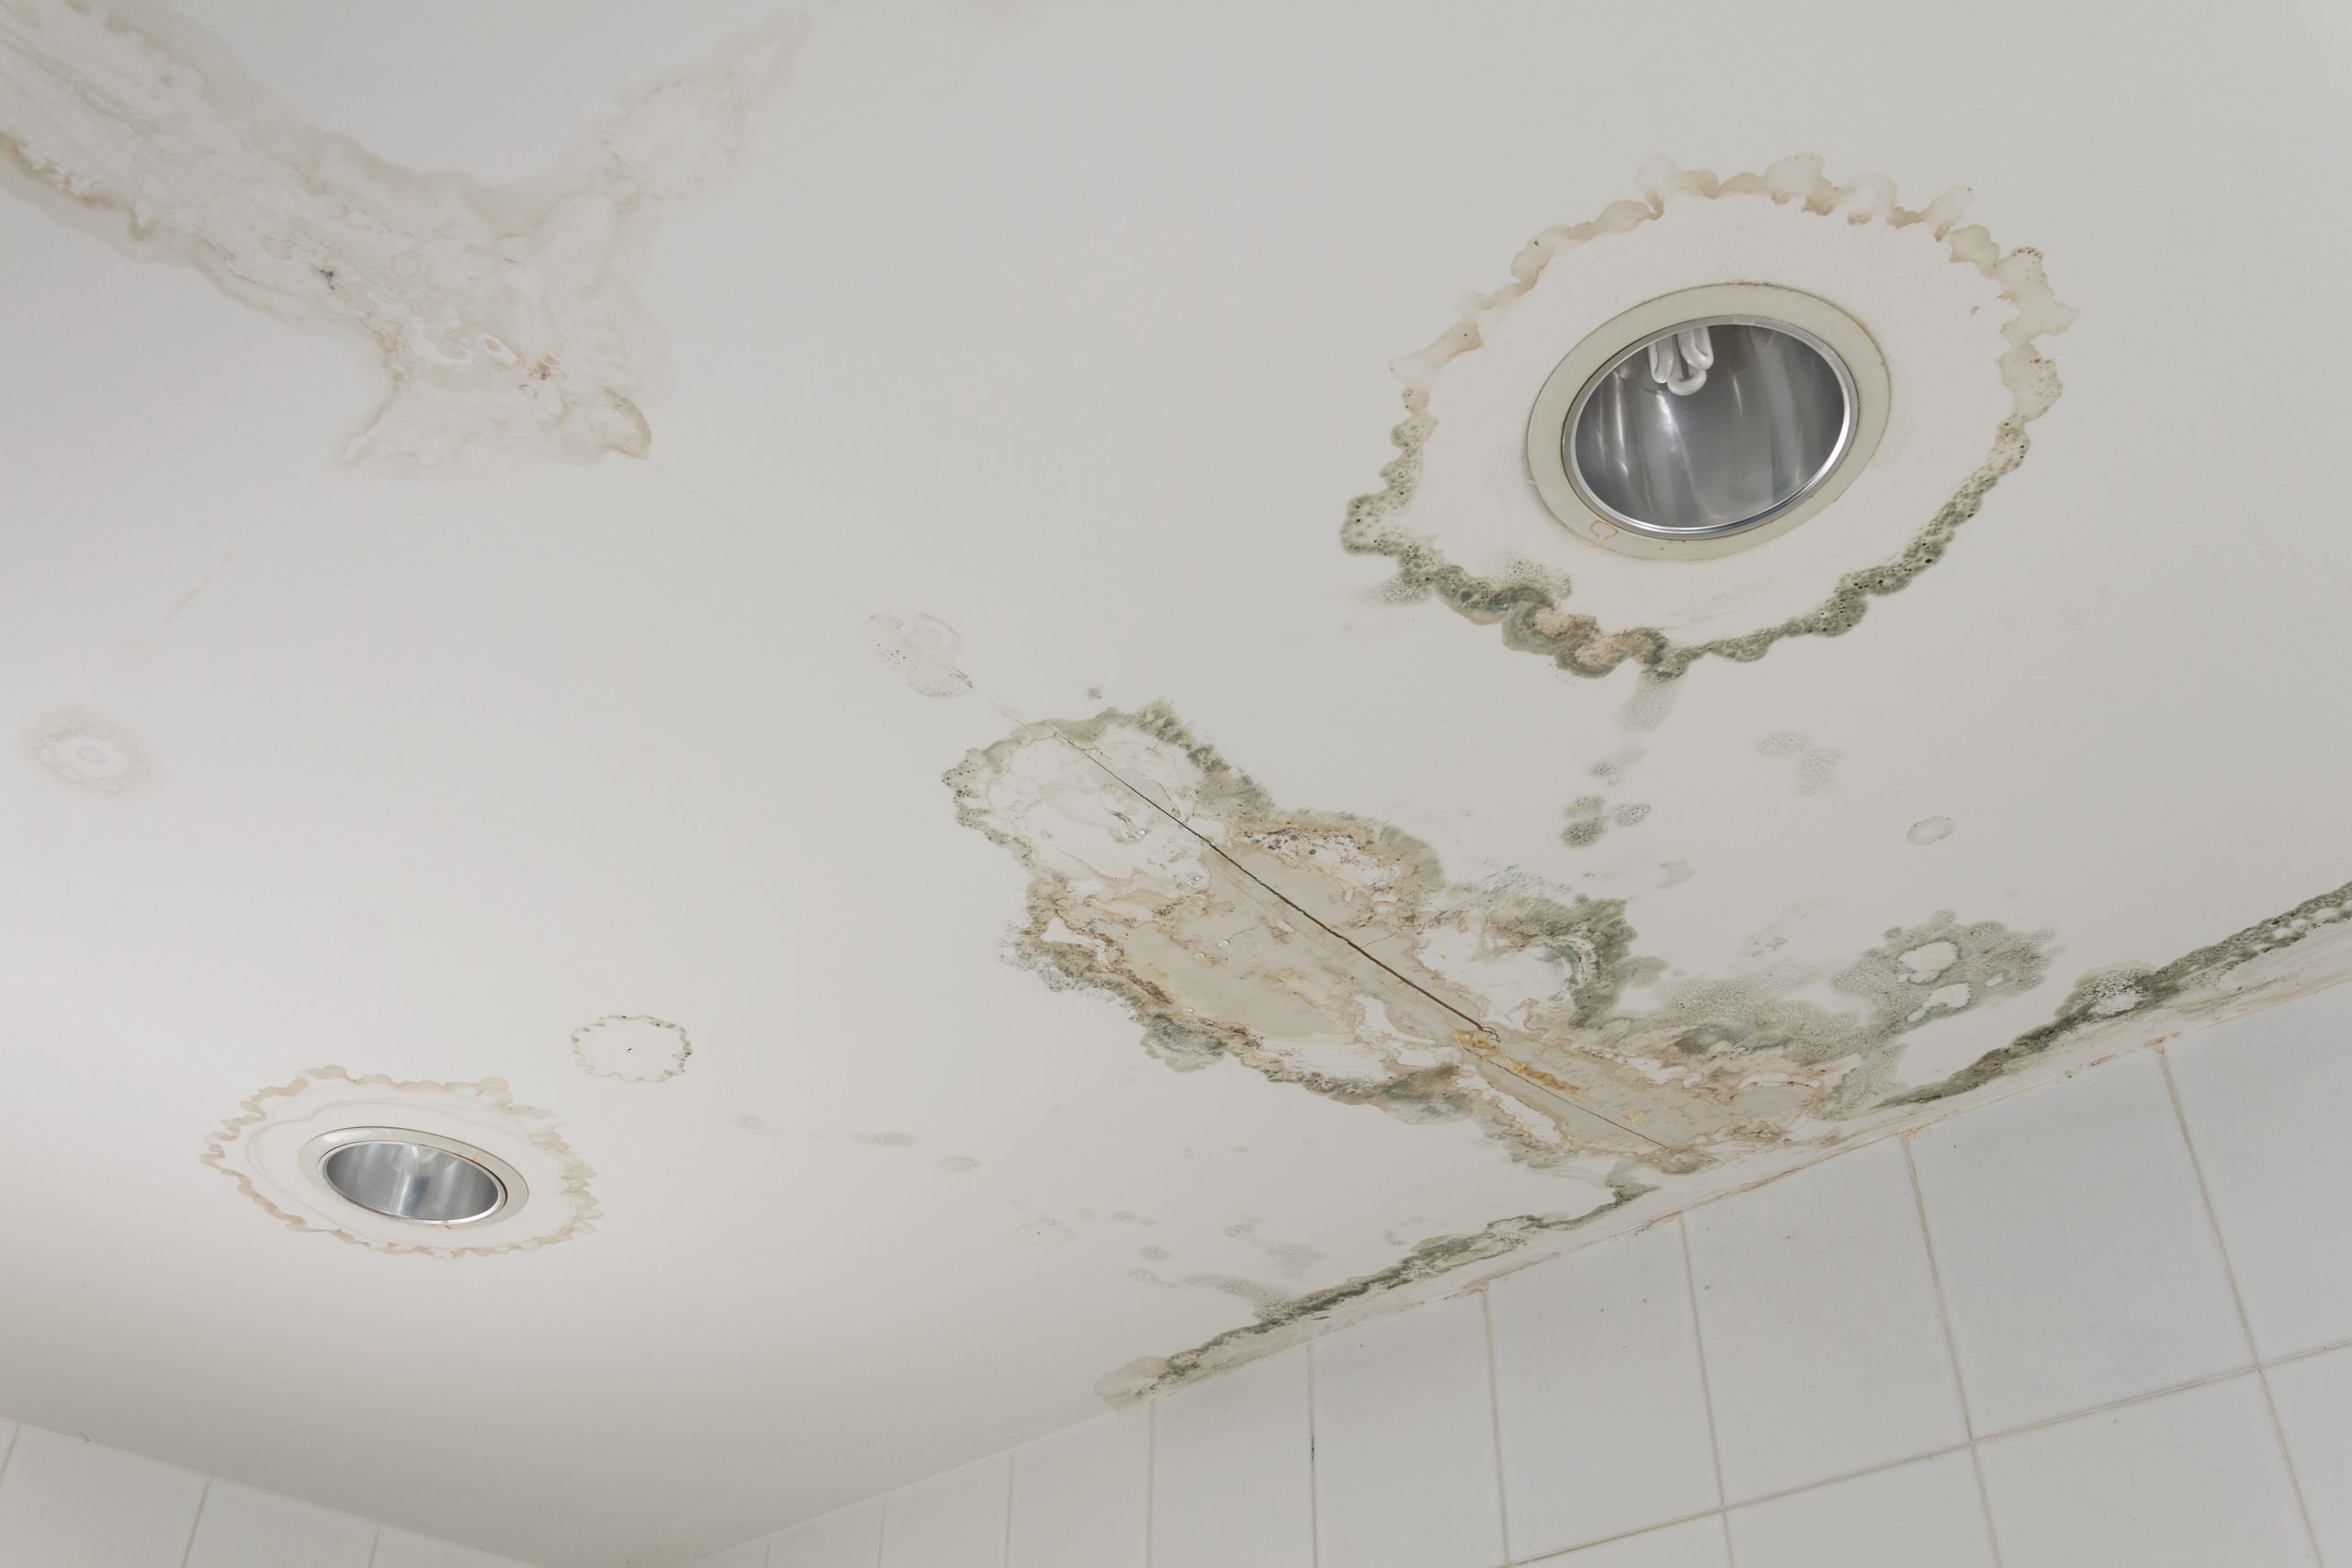 5 Telltale Signs of Water Damage in Your Property